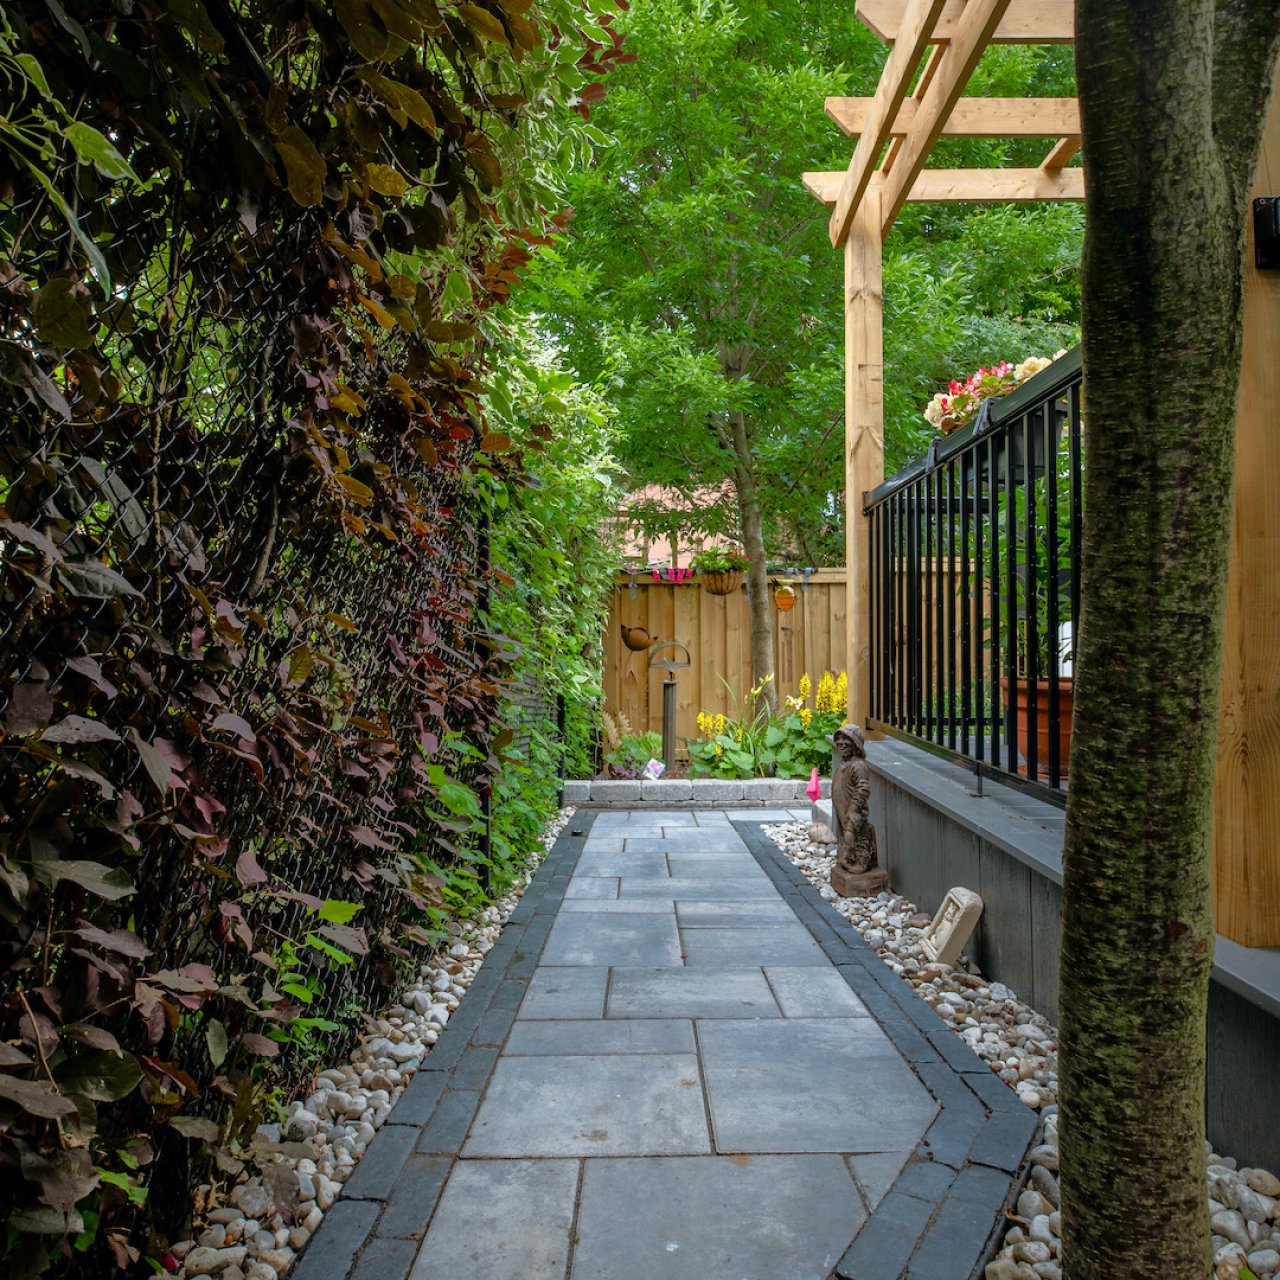 Residential backyard with stone pathway and plants